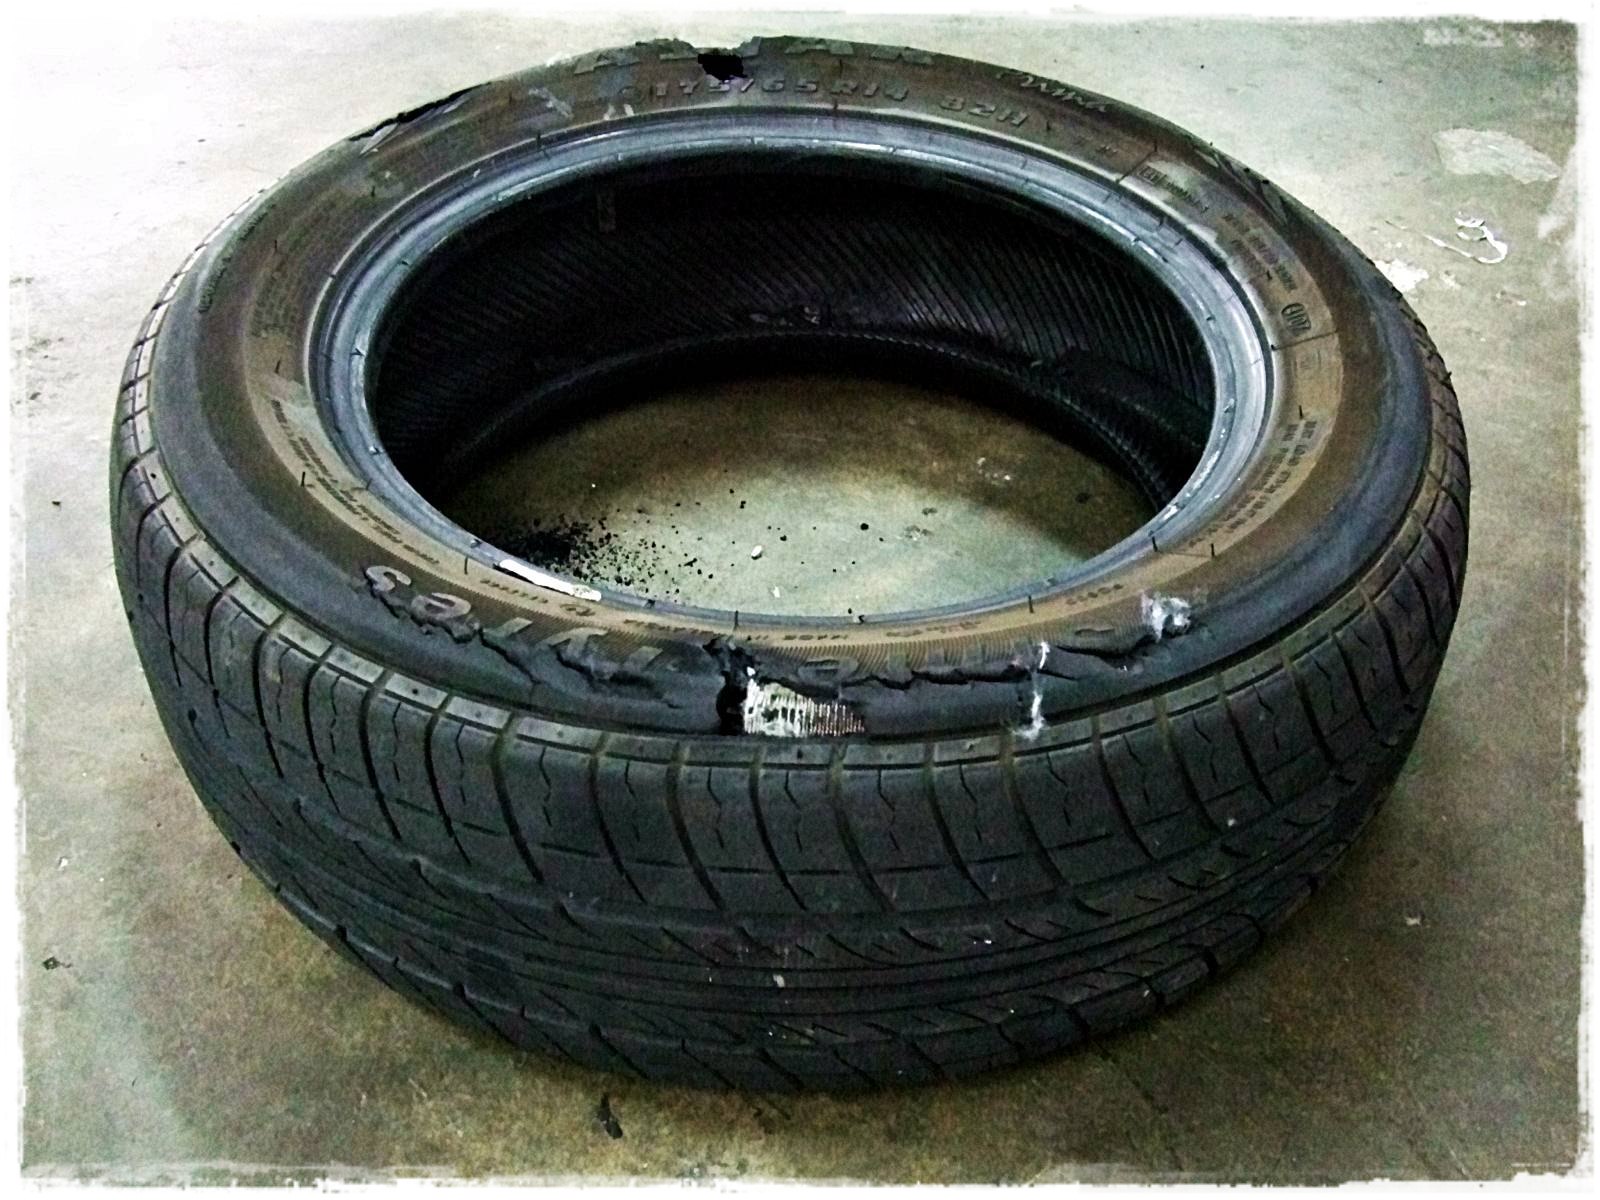 Is your tyre still repairable?